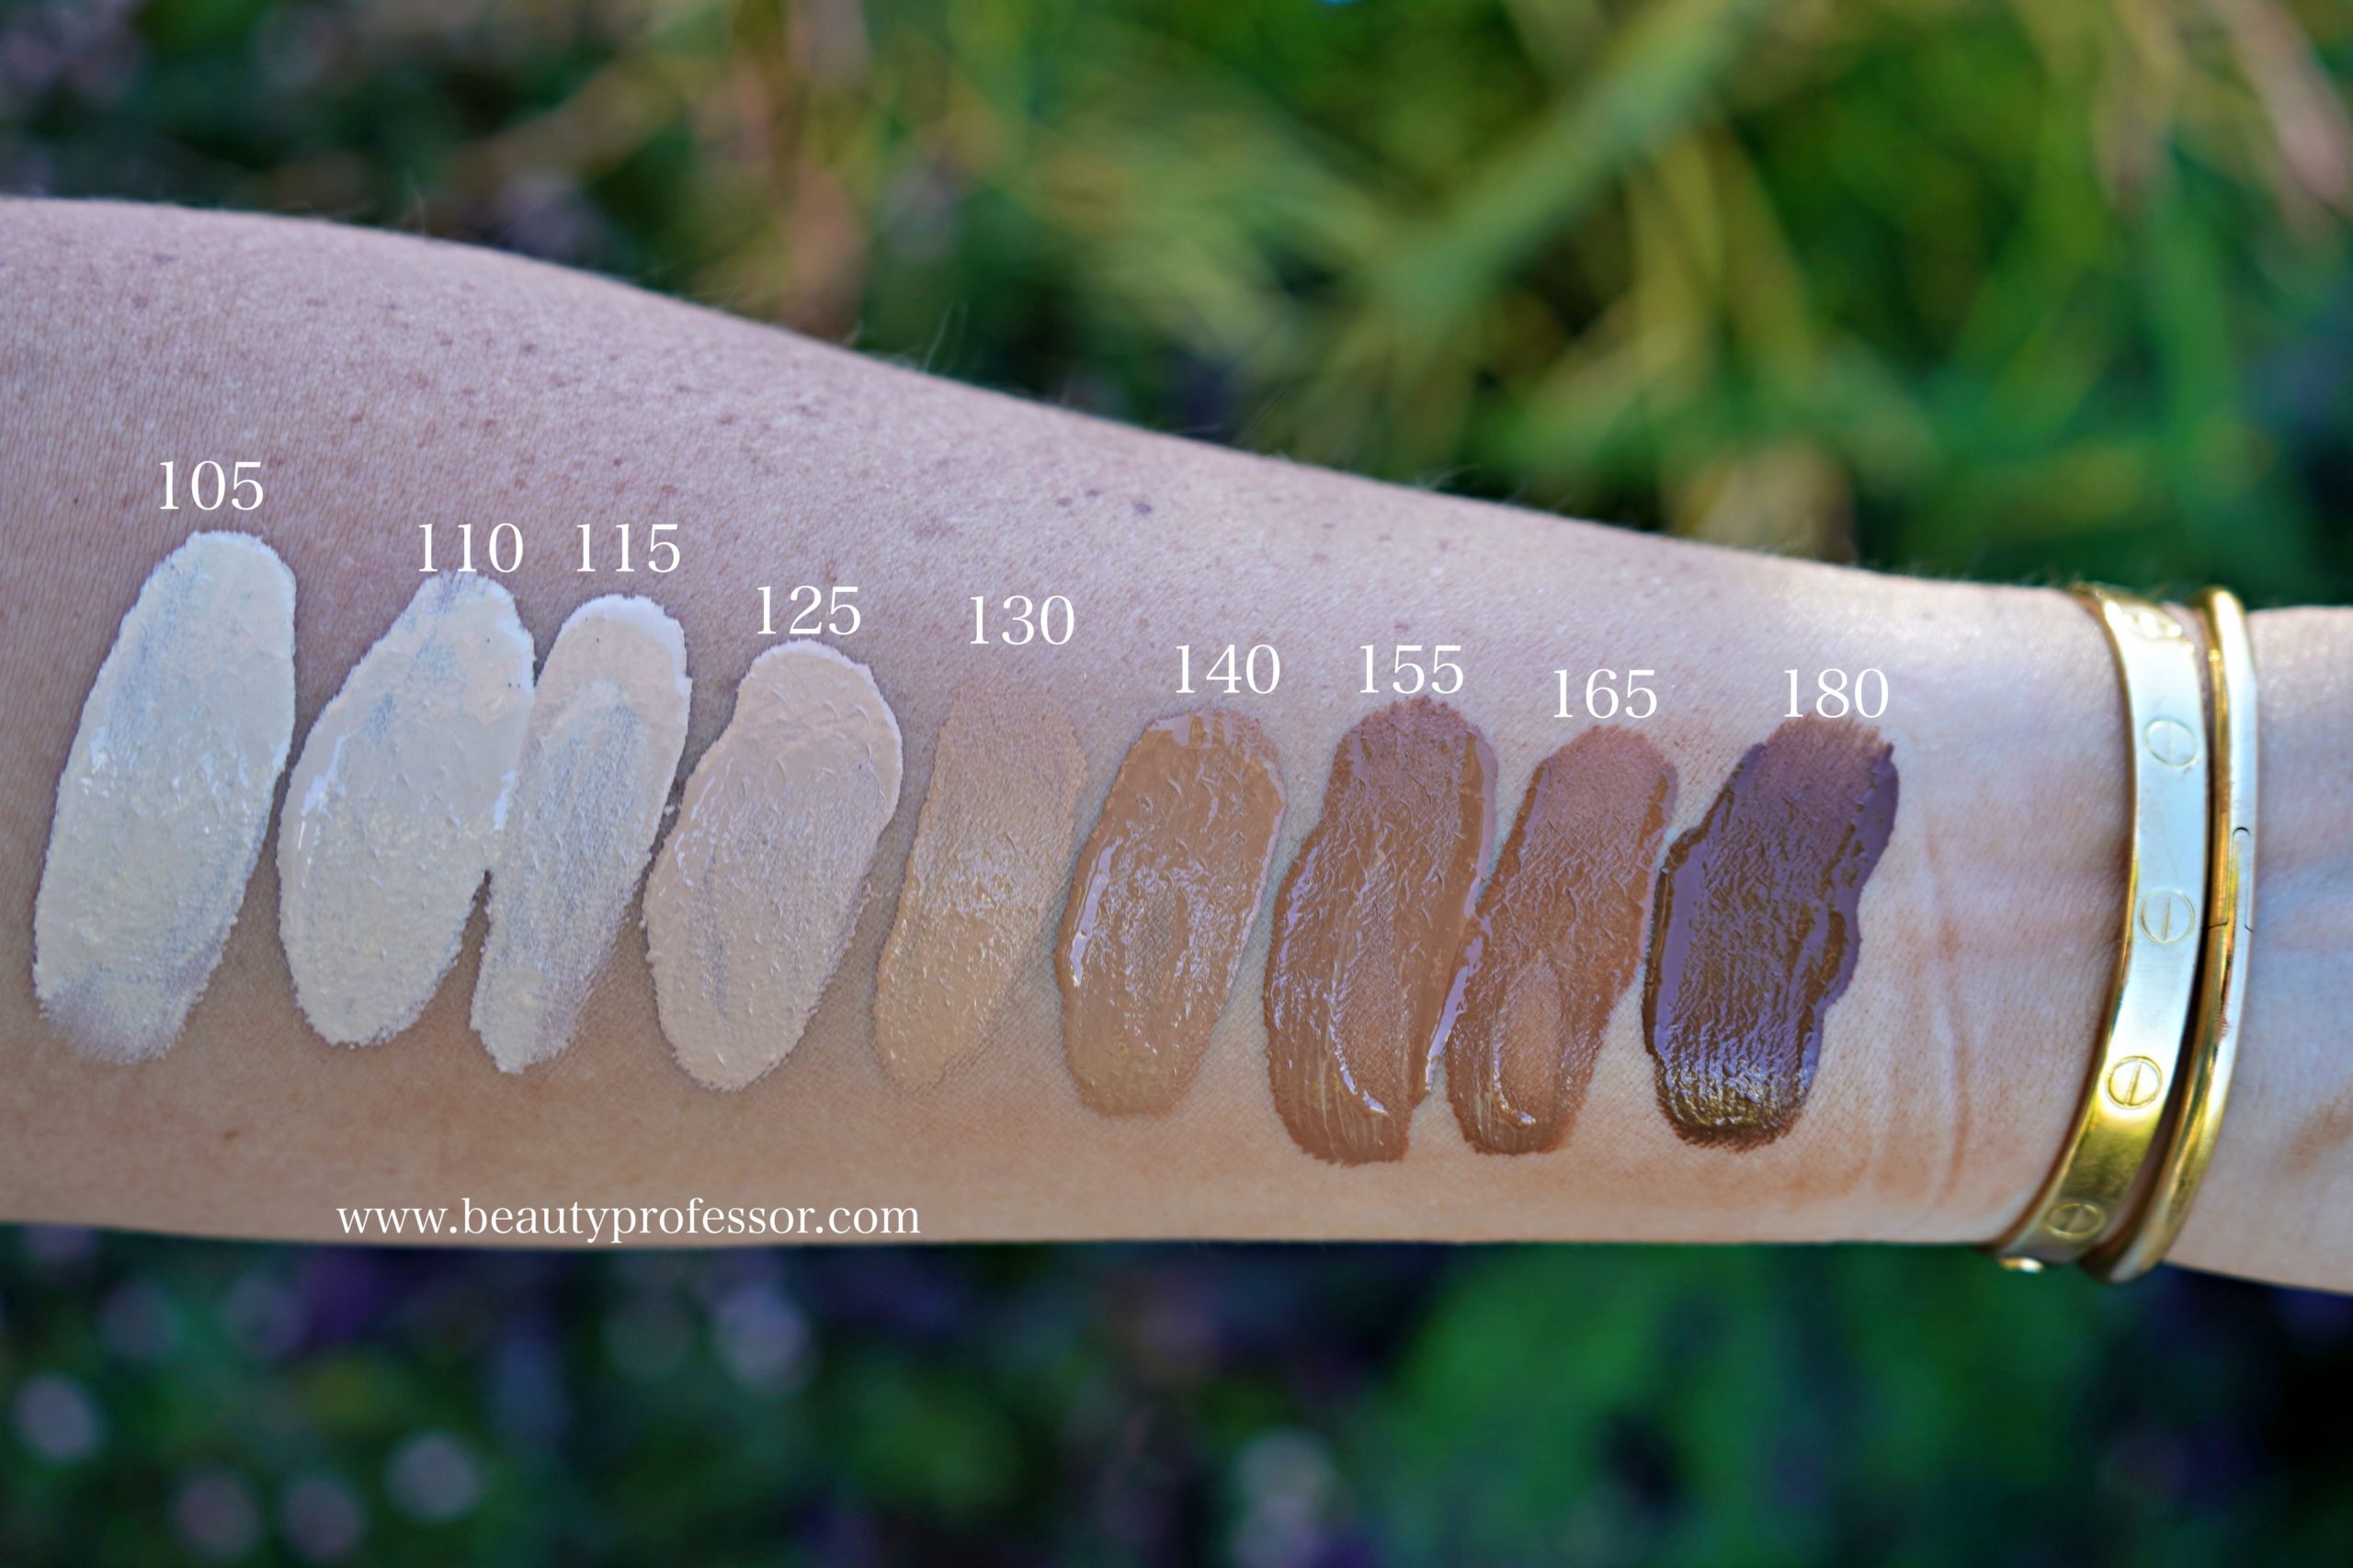 SUQQU The Liquid Foundation shades for skin with neutral beige undertones in outdoor shade.